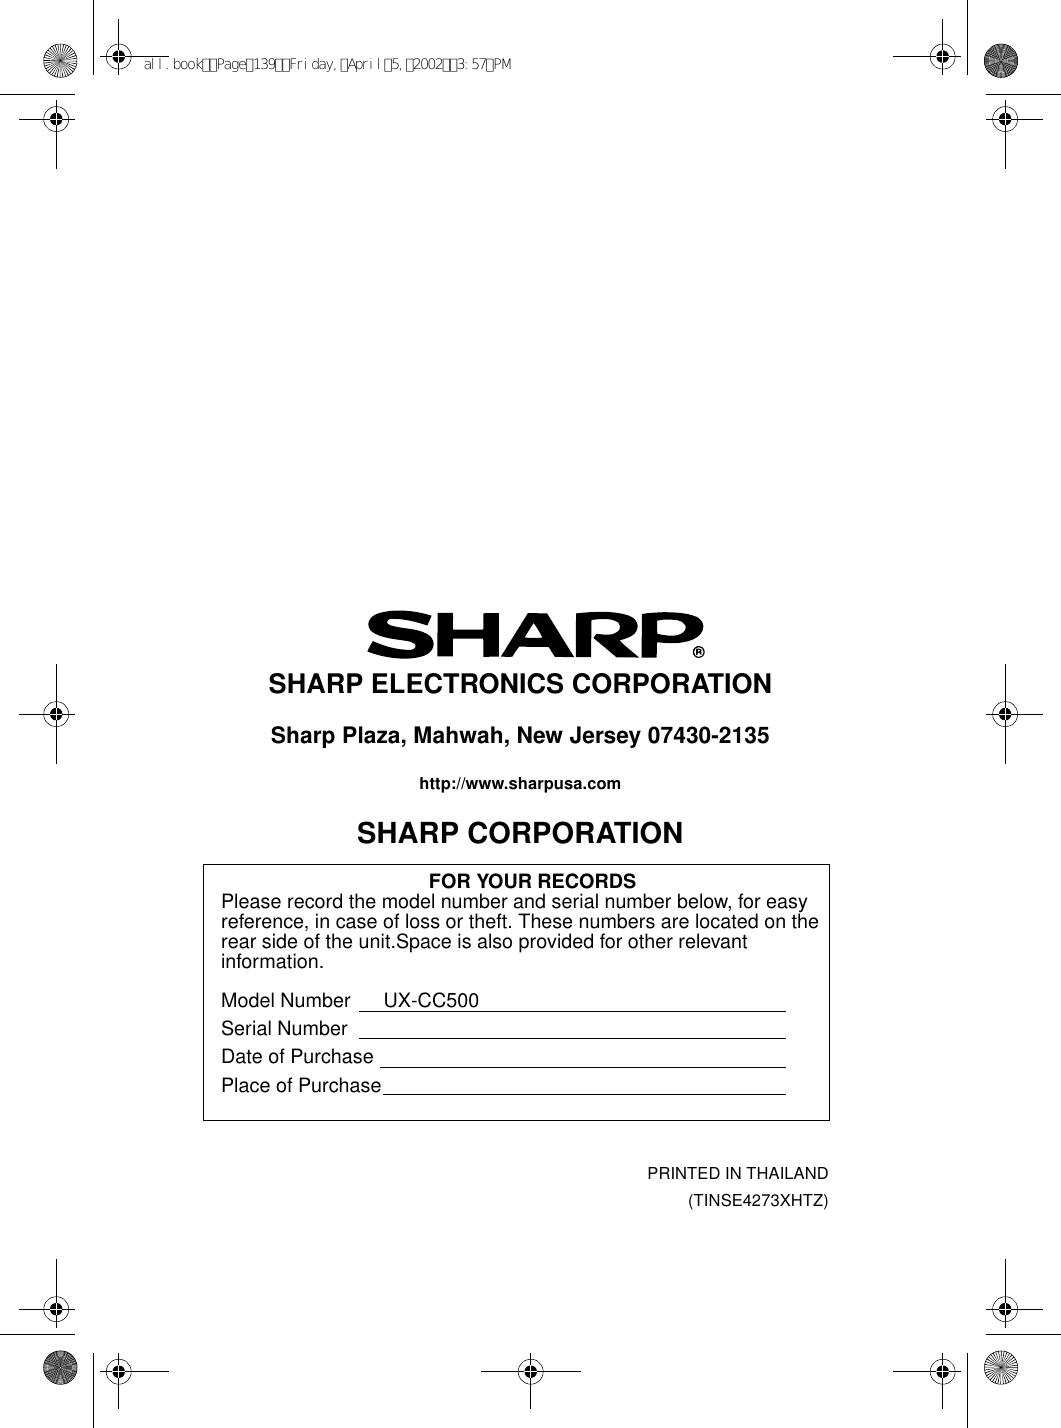 PRINTED IN THAILAND(TINSE4273XHTZ)SHARP ELECTRONICS CORPORATIONSharp Plaza, Mahwah, New Jersey 07430-2135http://www.sharpusa.comSHARP CORPORATIONFOR YOUR RECORDSPlease record the model number and serial number below, for easy reference, in case of loss or theft. These numbers are located on the rear side of the unit.Space is also provided for other relevant information.Model Number      UX-CC500Serial NumberDate of PurchasePlace of Purchaseall.bookPage139Friday,April5,20023:57PM